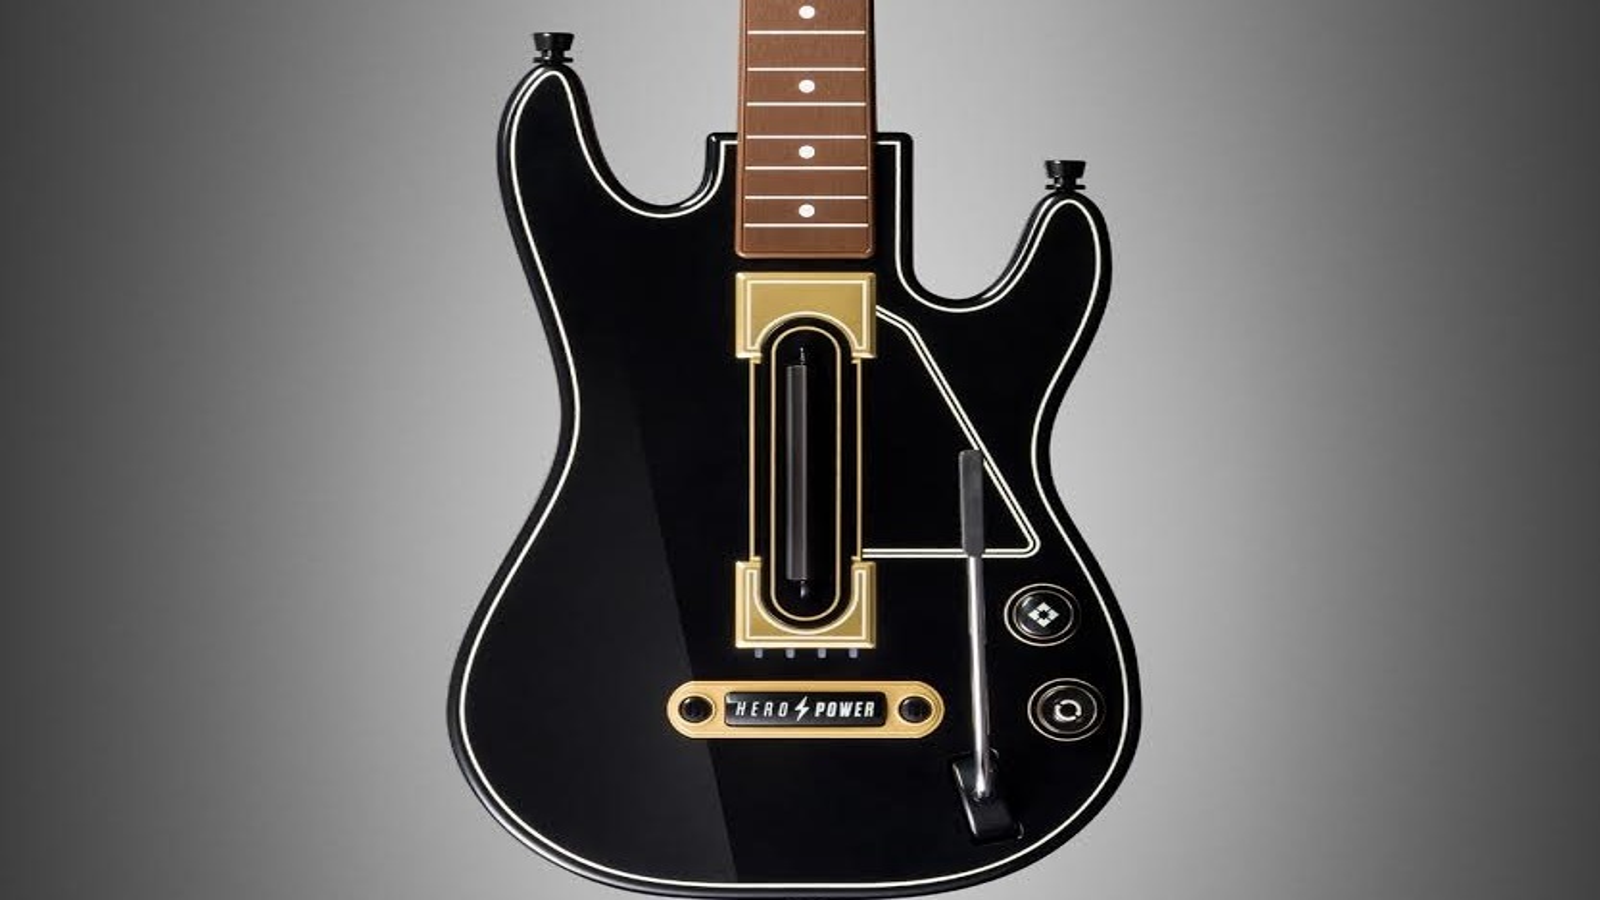 Come See the New 'Guitar Hero Live' Guitar Reviewed on the PS4